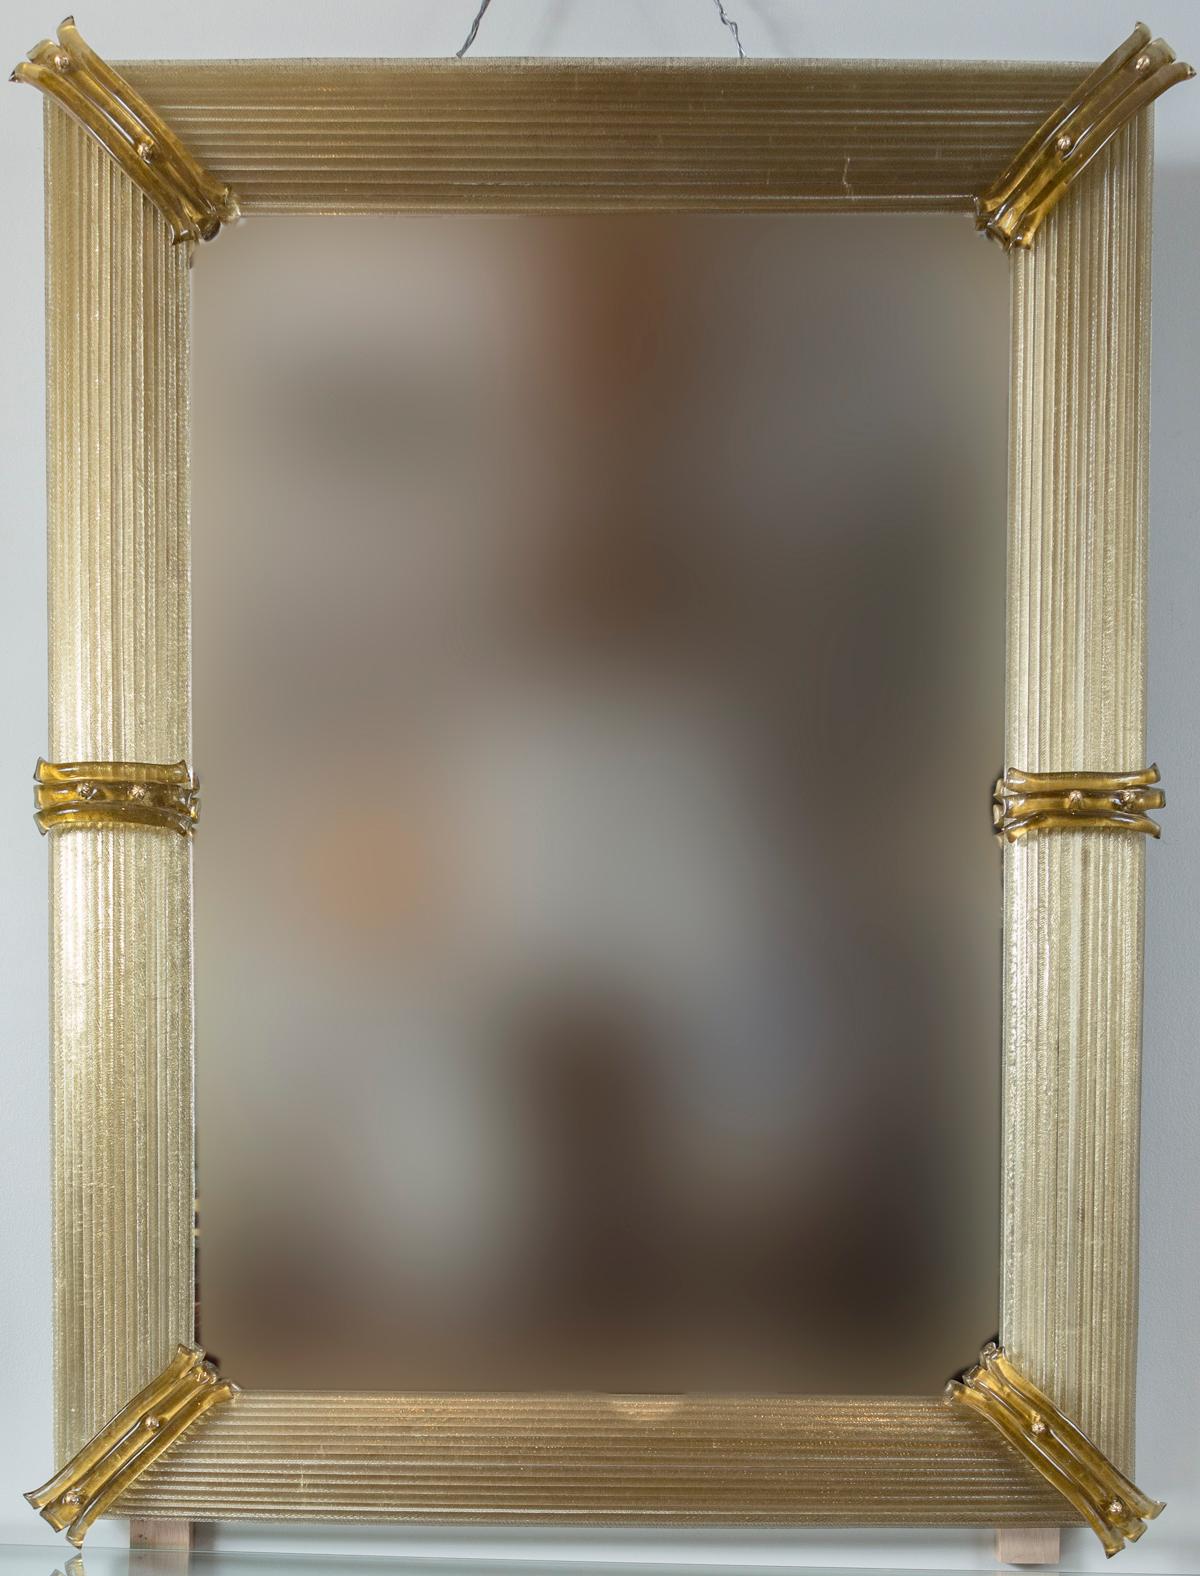 Lovely custom artisan blown taupe glass framed mirrors, frame comprised of long blown twisting straw rods
Weight approx 60 lbs, (crate to ship provided )
Date: Contemporary
Origin: Murano, Italy
Condition: Excellent
Dimensions: 38 1/2” long x 58”